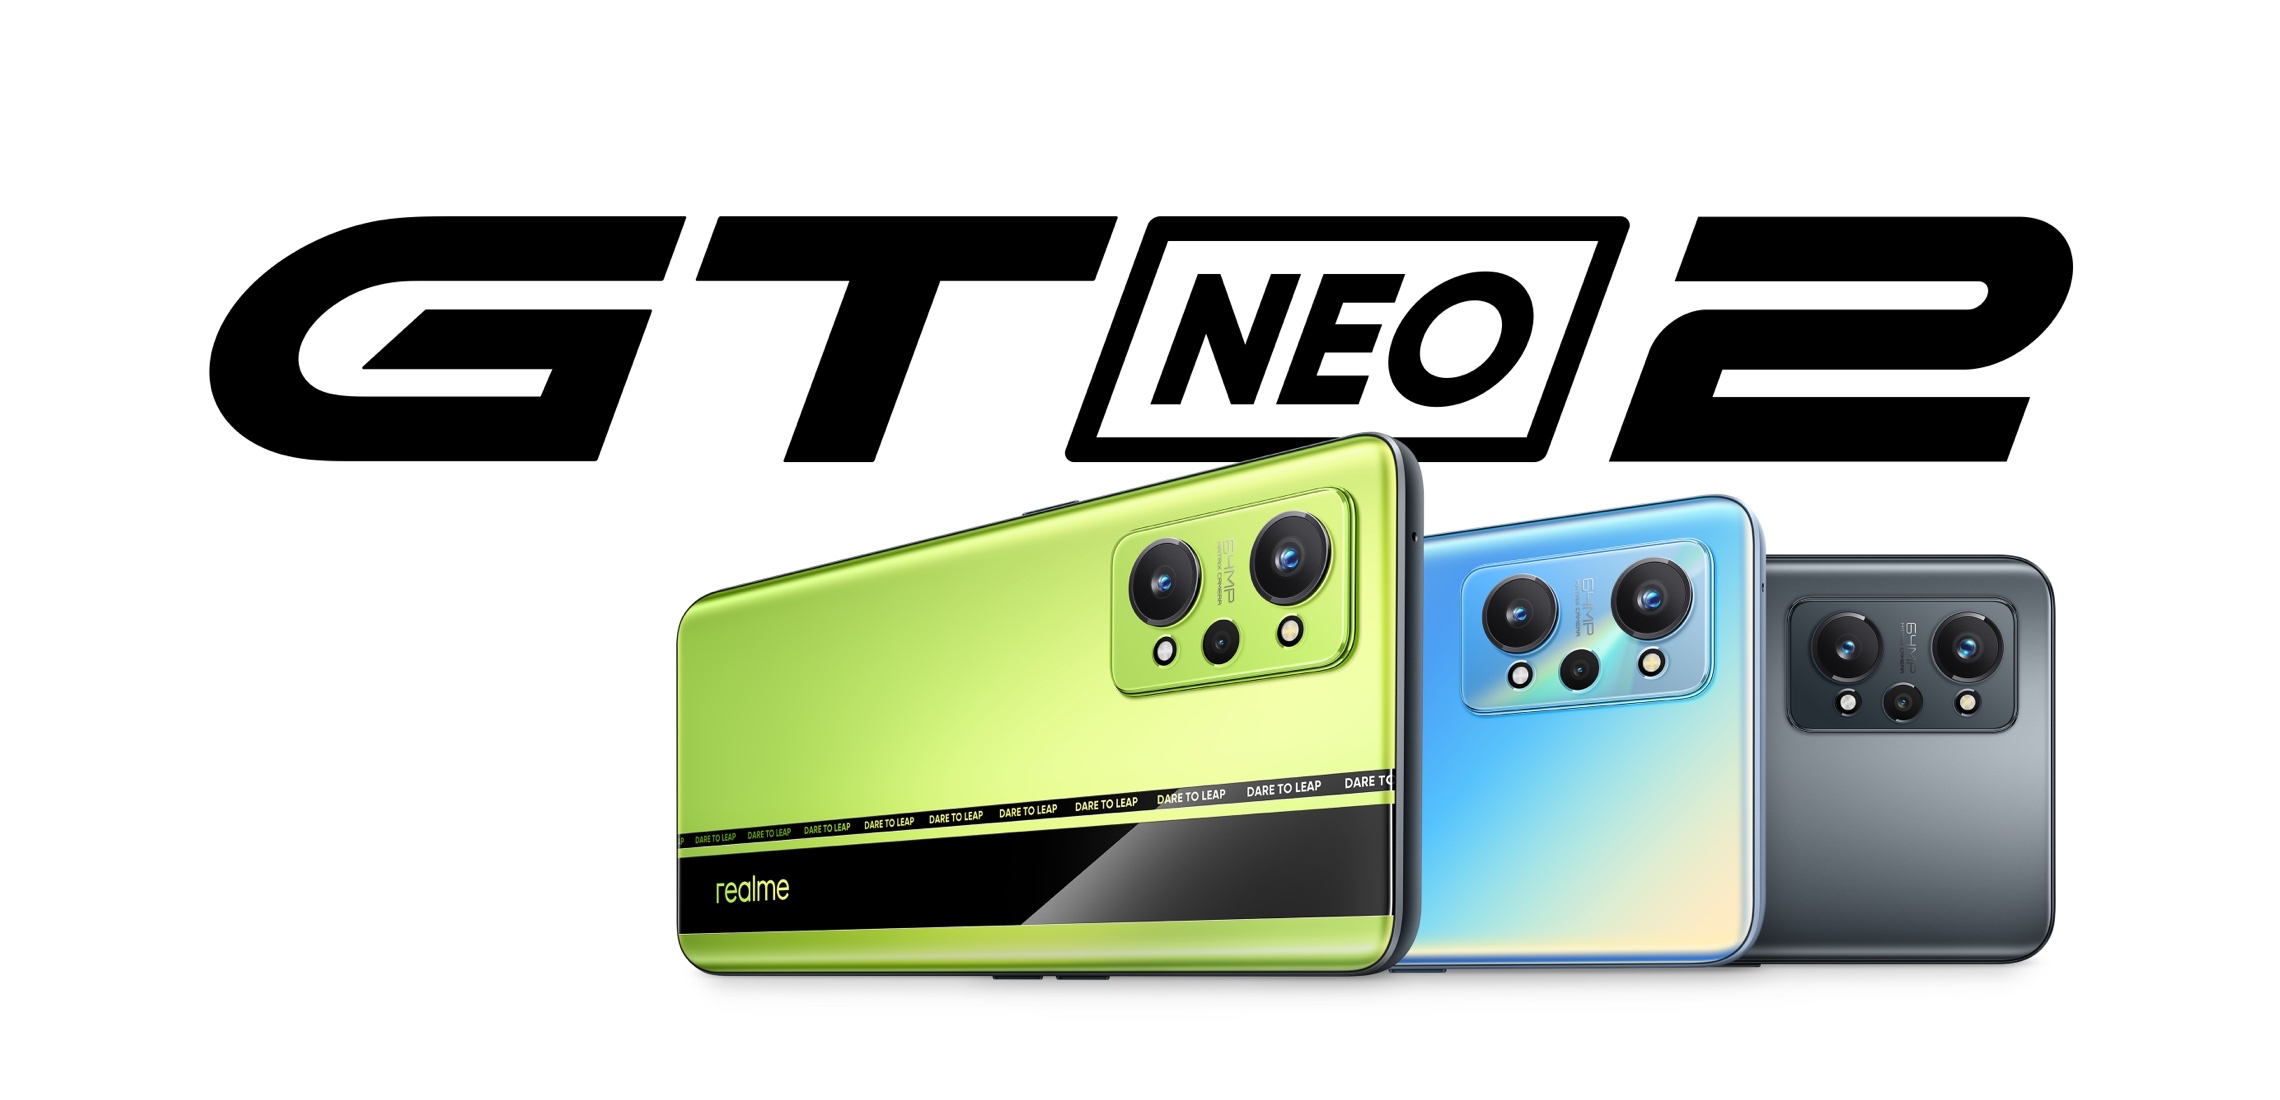 Realme GT Neo 2: Snapdragon 870 chip, 64 MP triple camera, 65W fast charging and price tag from $386